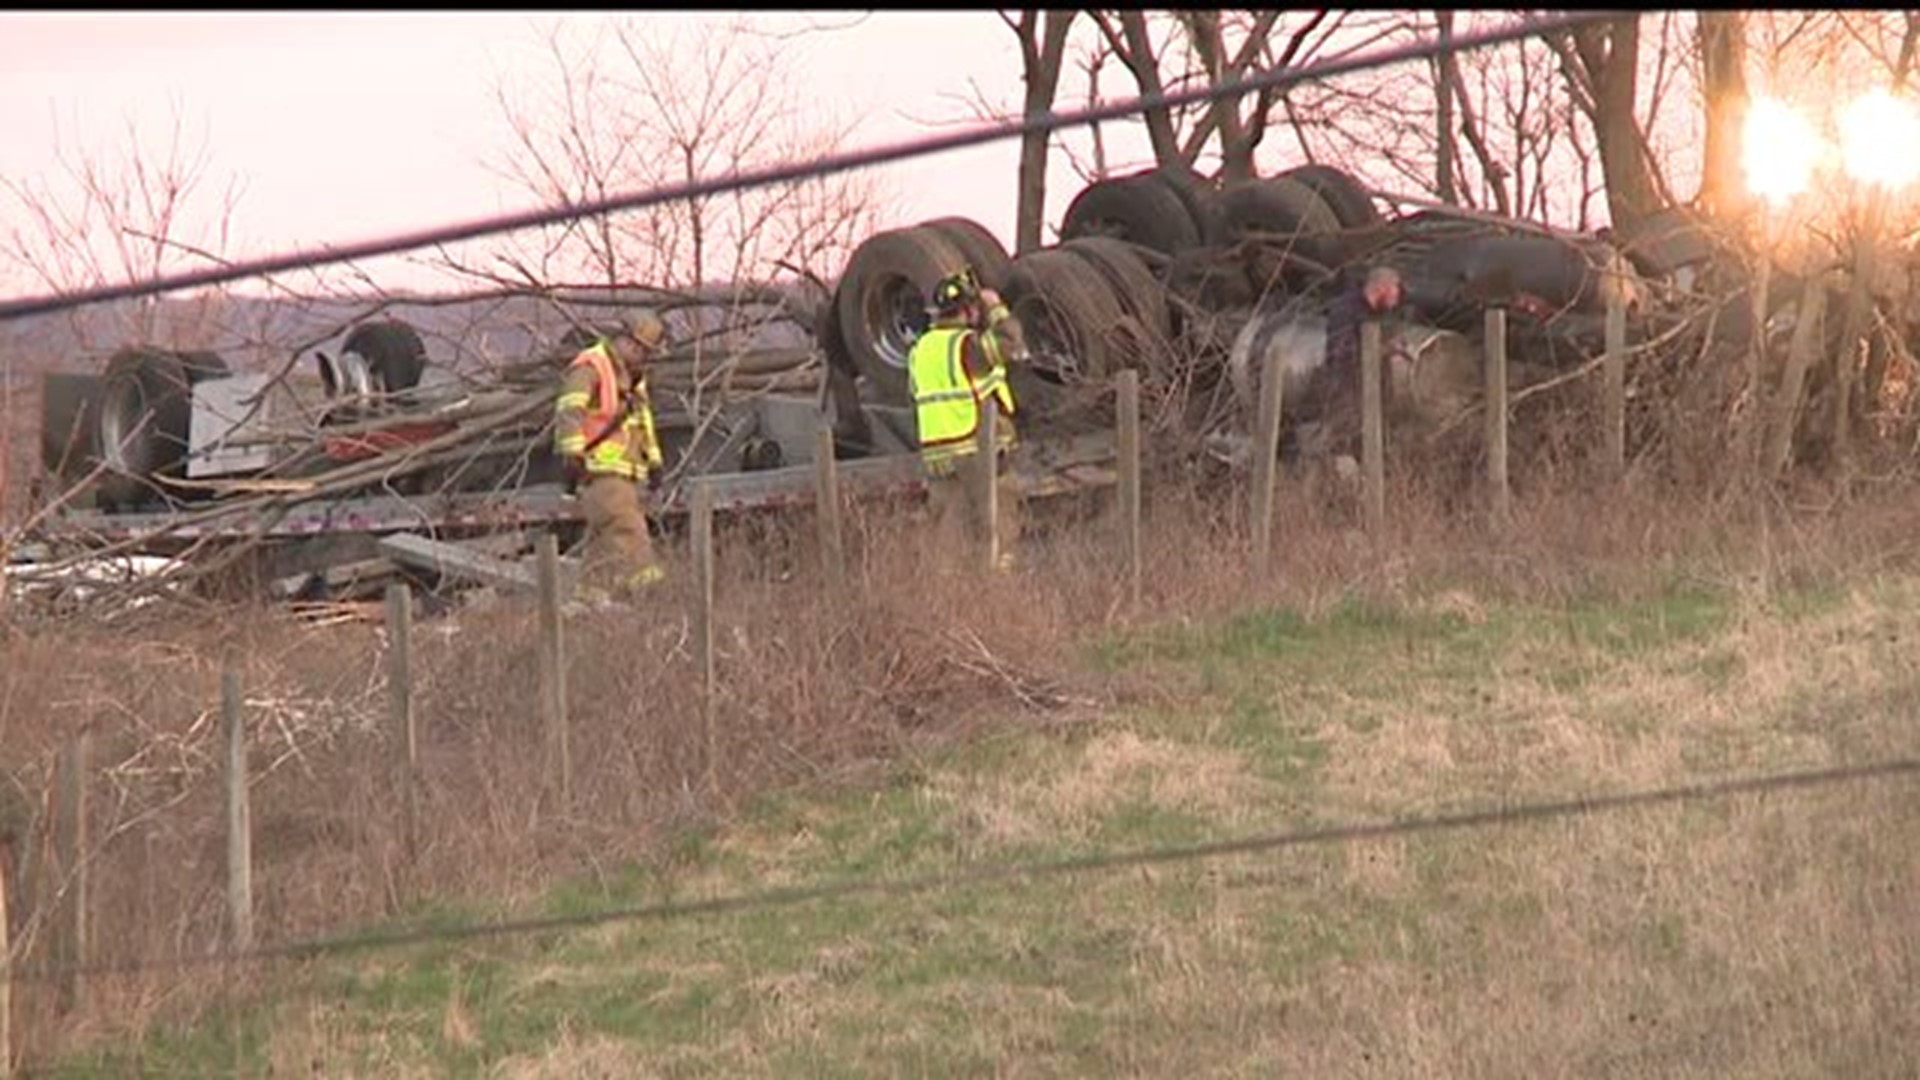 Coroner called to scene of tractor trailer accident in Dauphin County